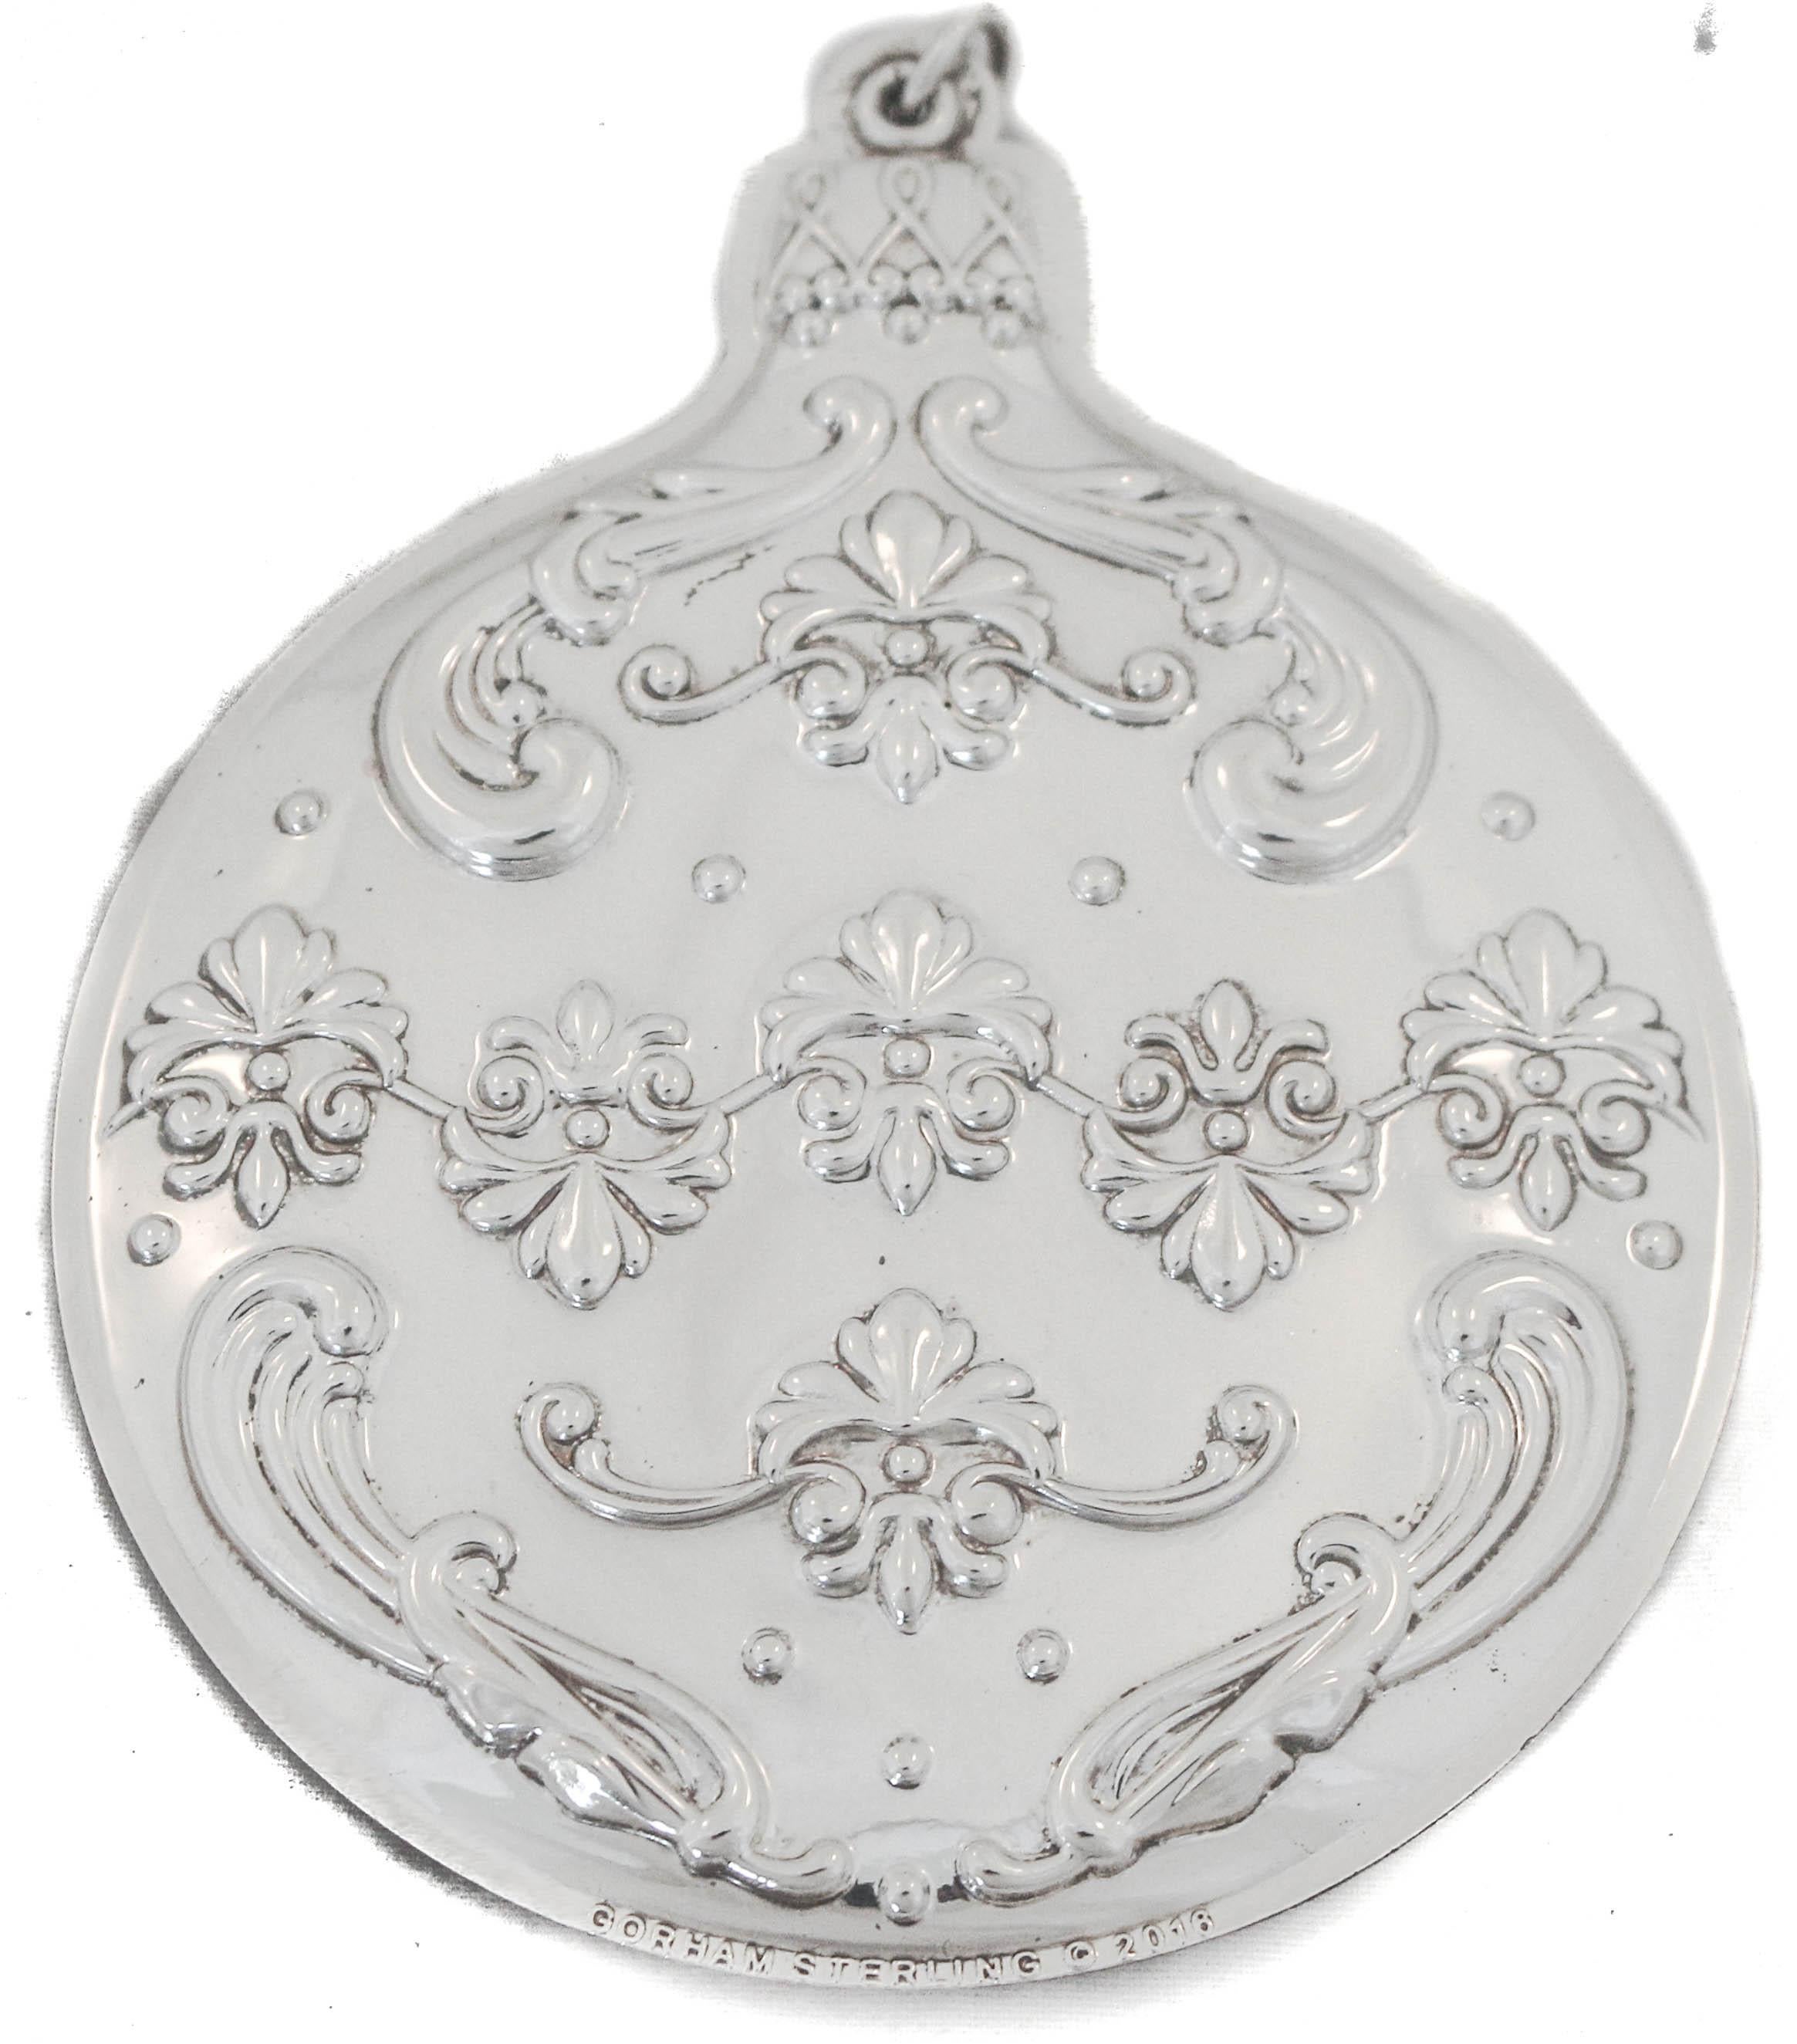 We are thrilled to offer you this sterling silver Christmas ball ornament made by Gorham Silversmiths of Providence, Rhode Island. 
It’s beautifully decorated on both side, so it doesn’t matter which side is showing. It has festive holiday motifs